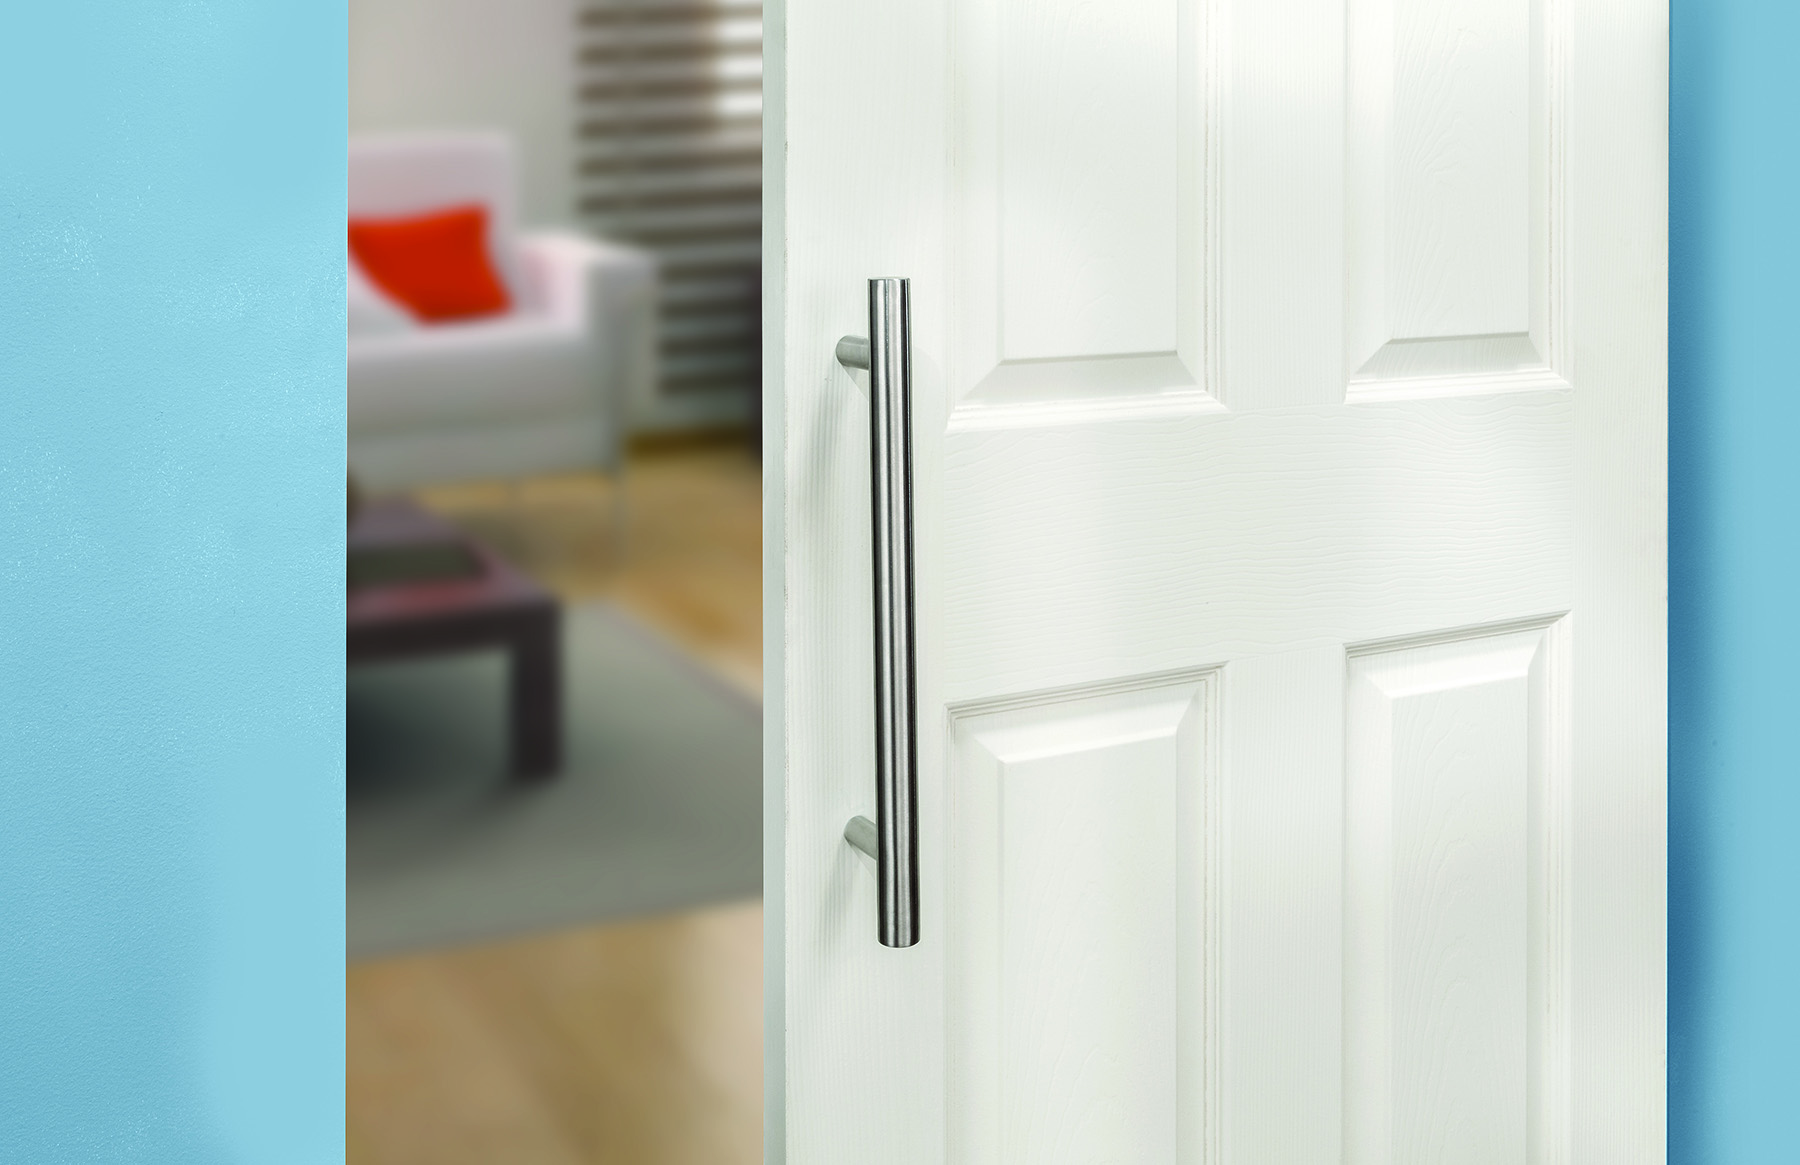 With the new hardware, Rockler also is offering several matching door handles.